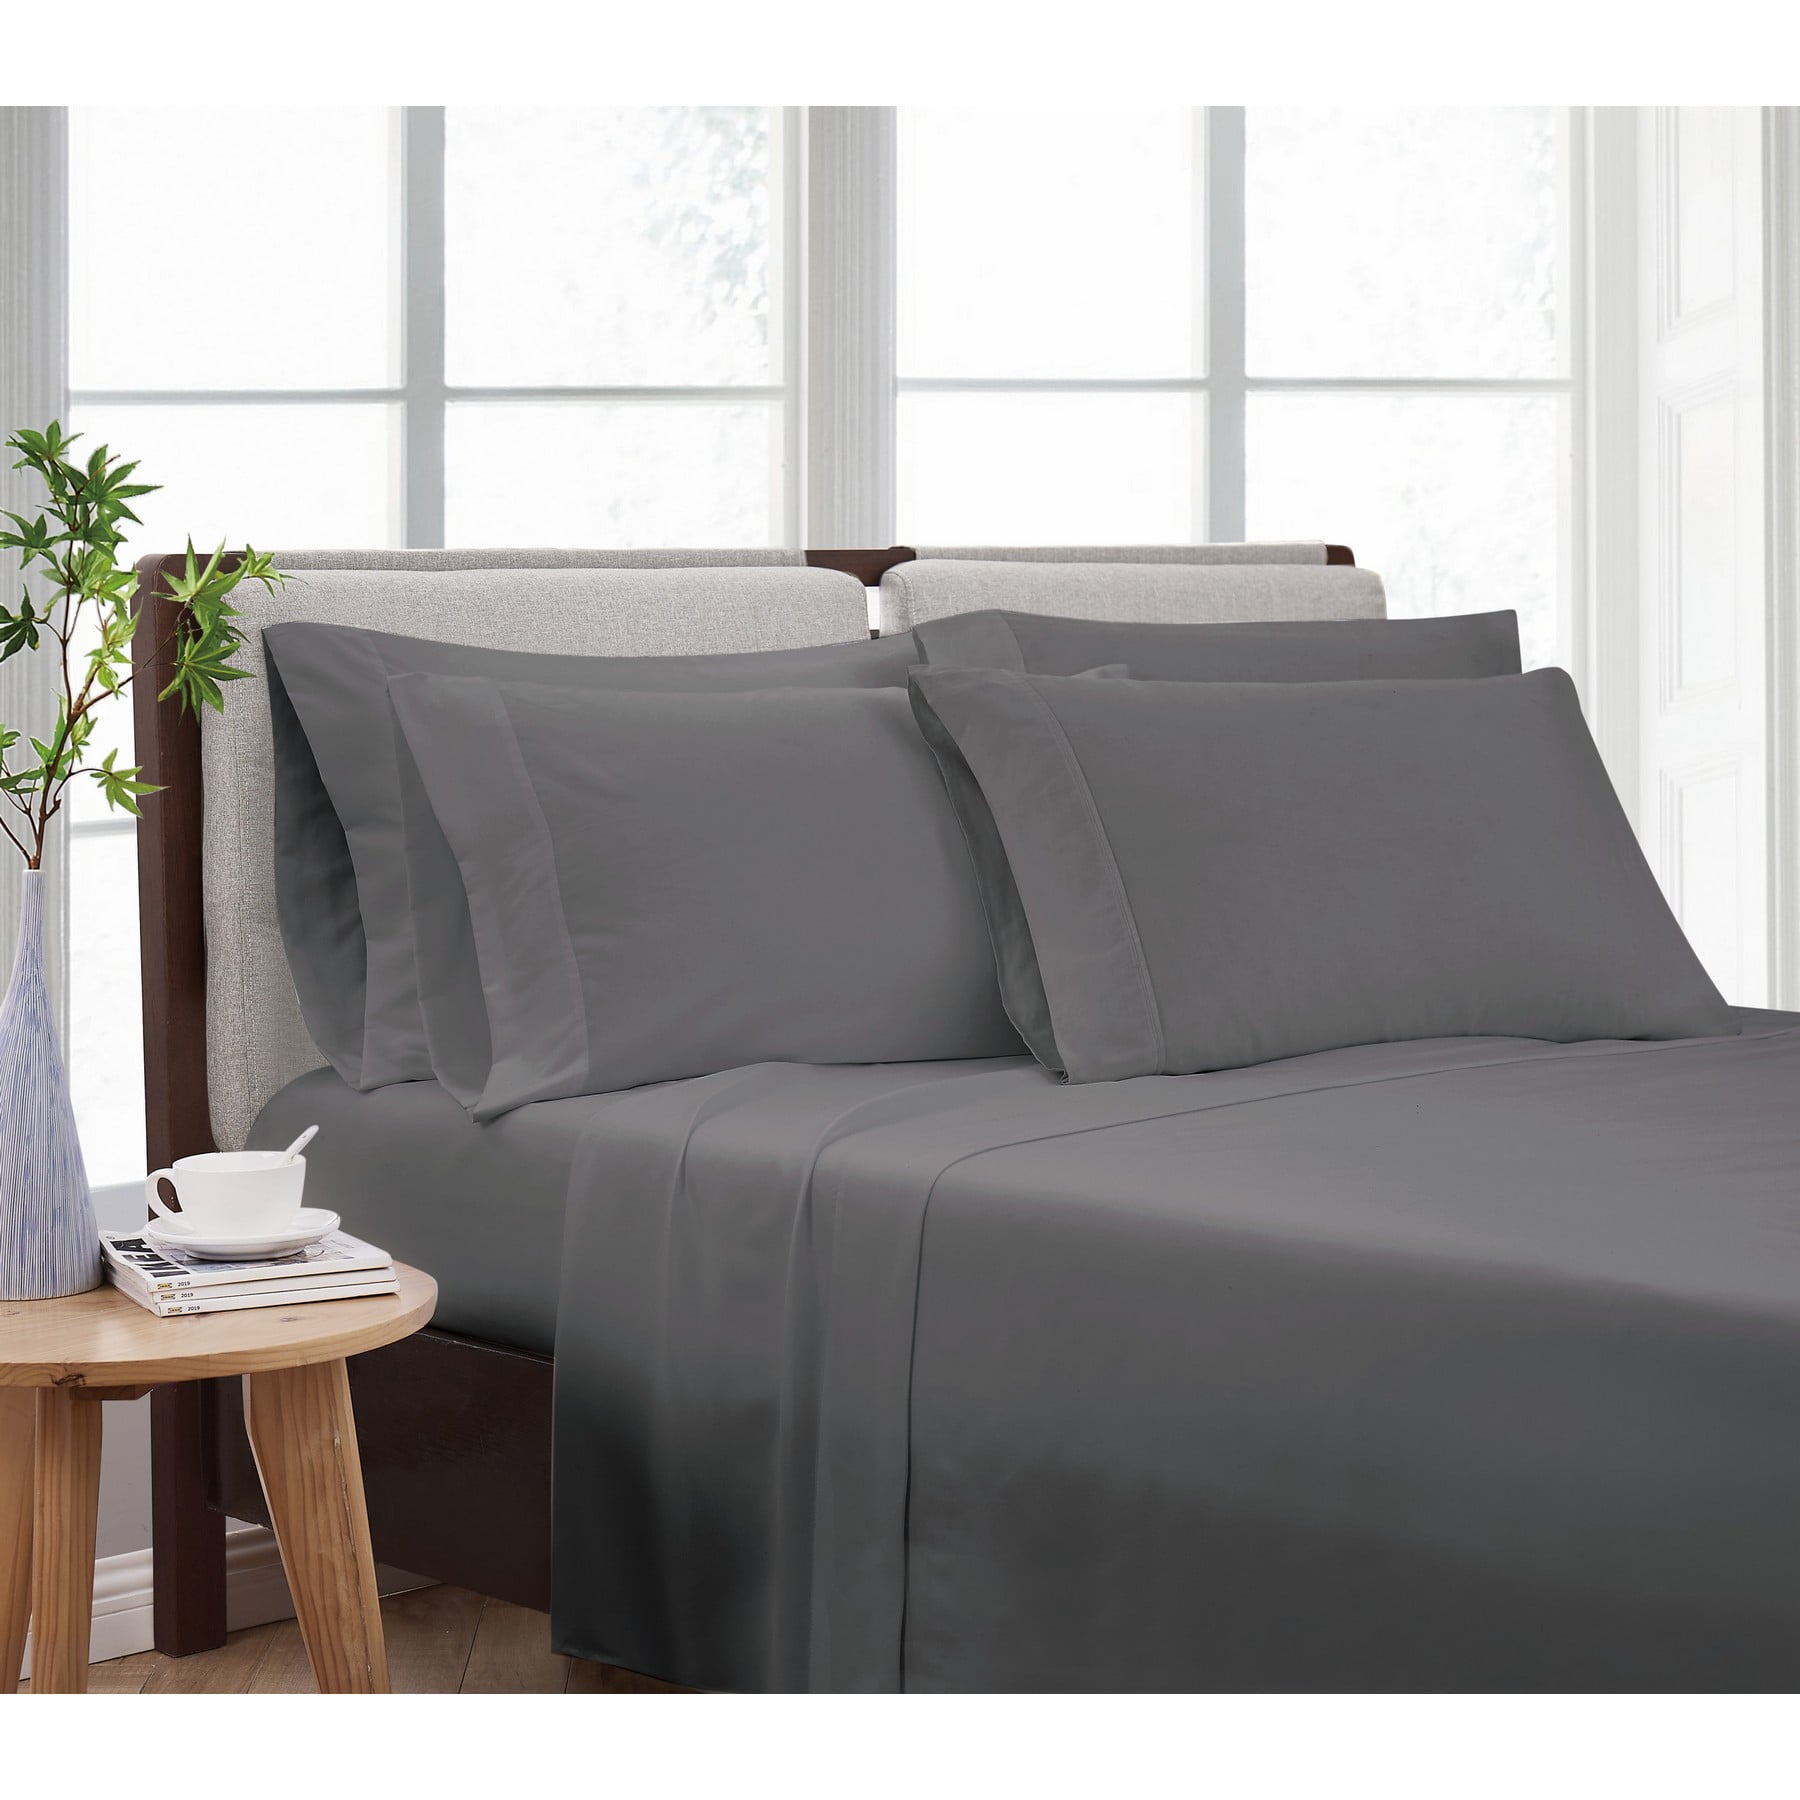 Cannon Twin Flat Sheet soft feel cotton rich 200 thread count 